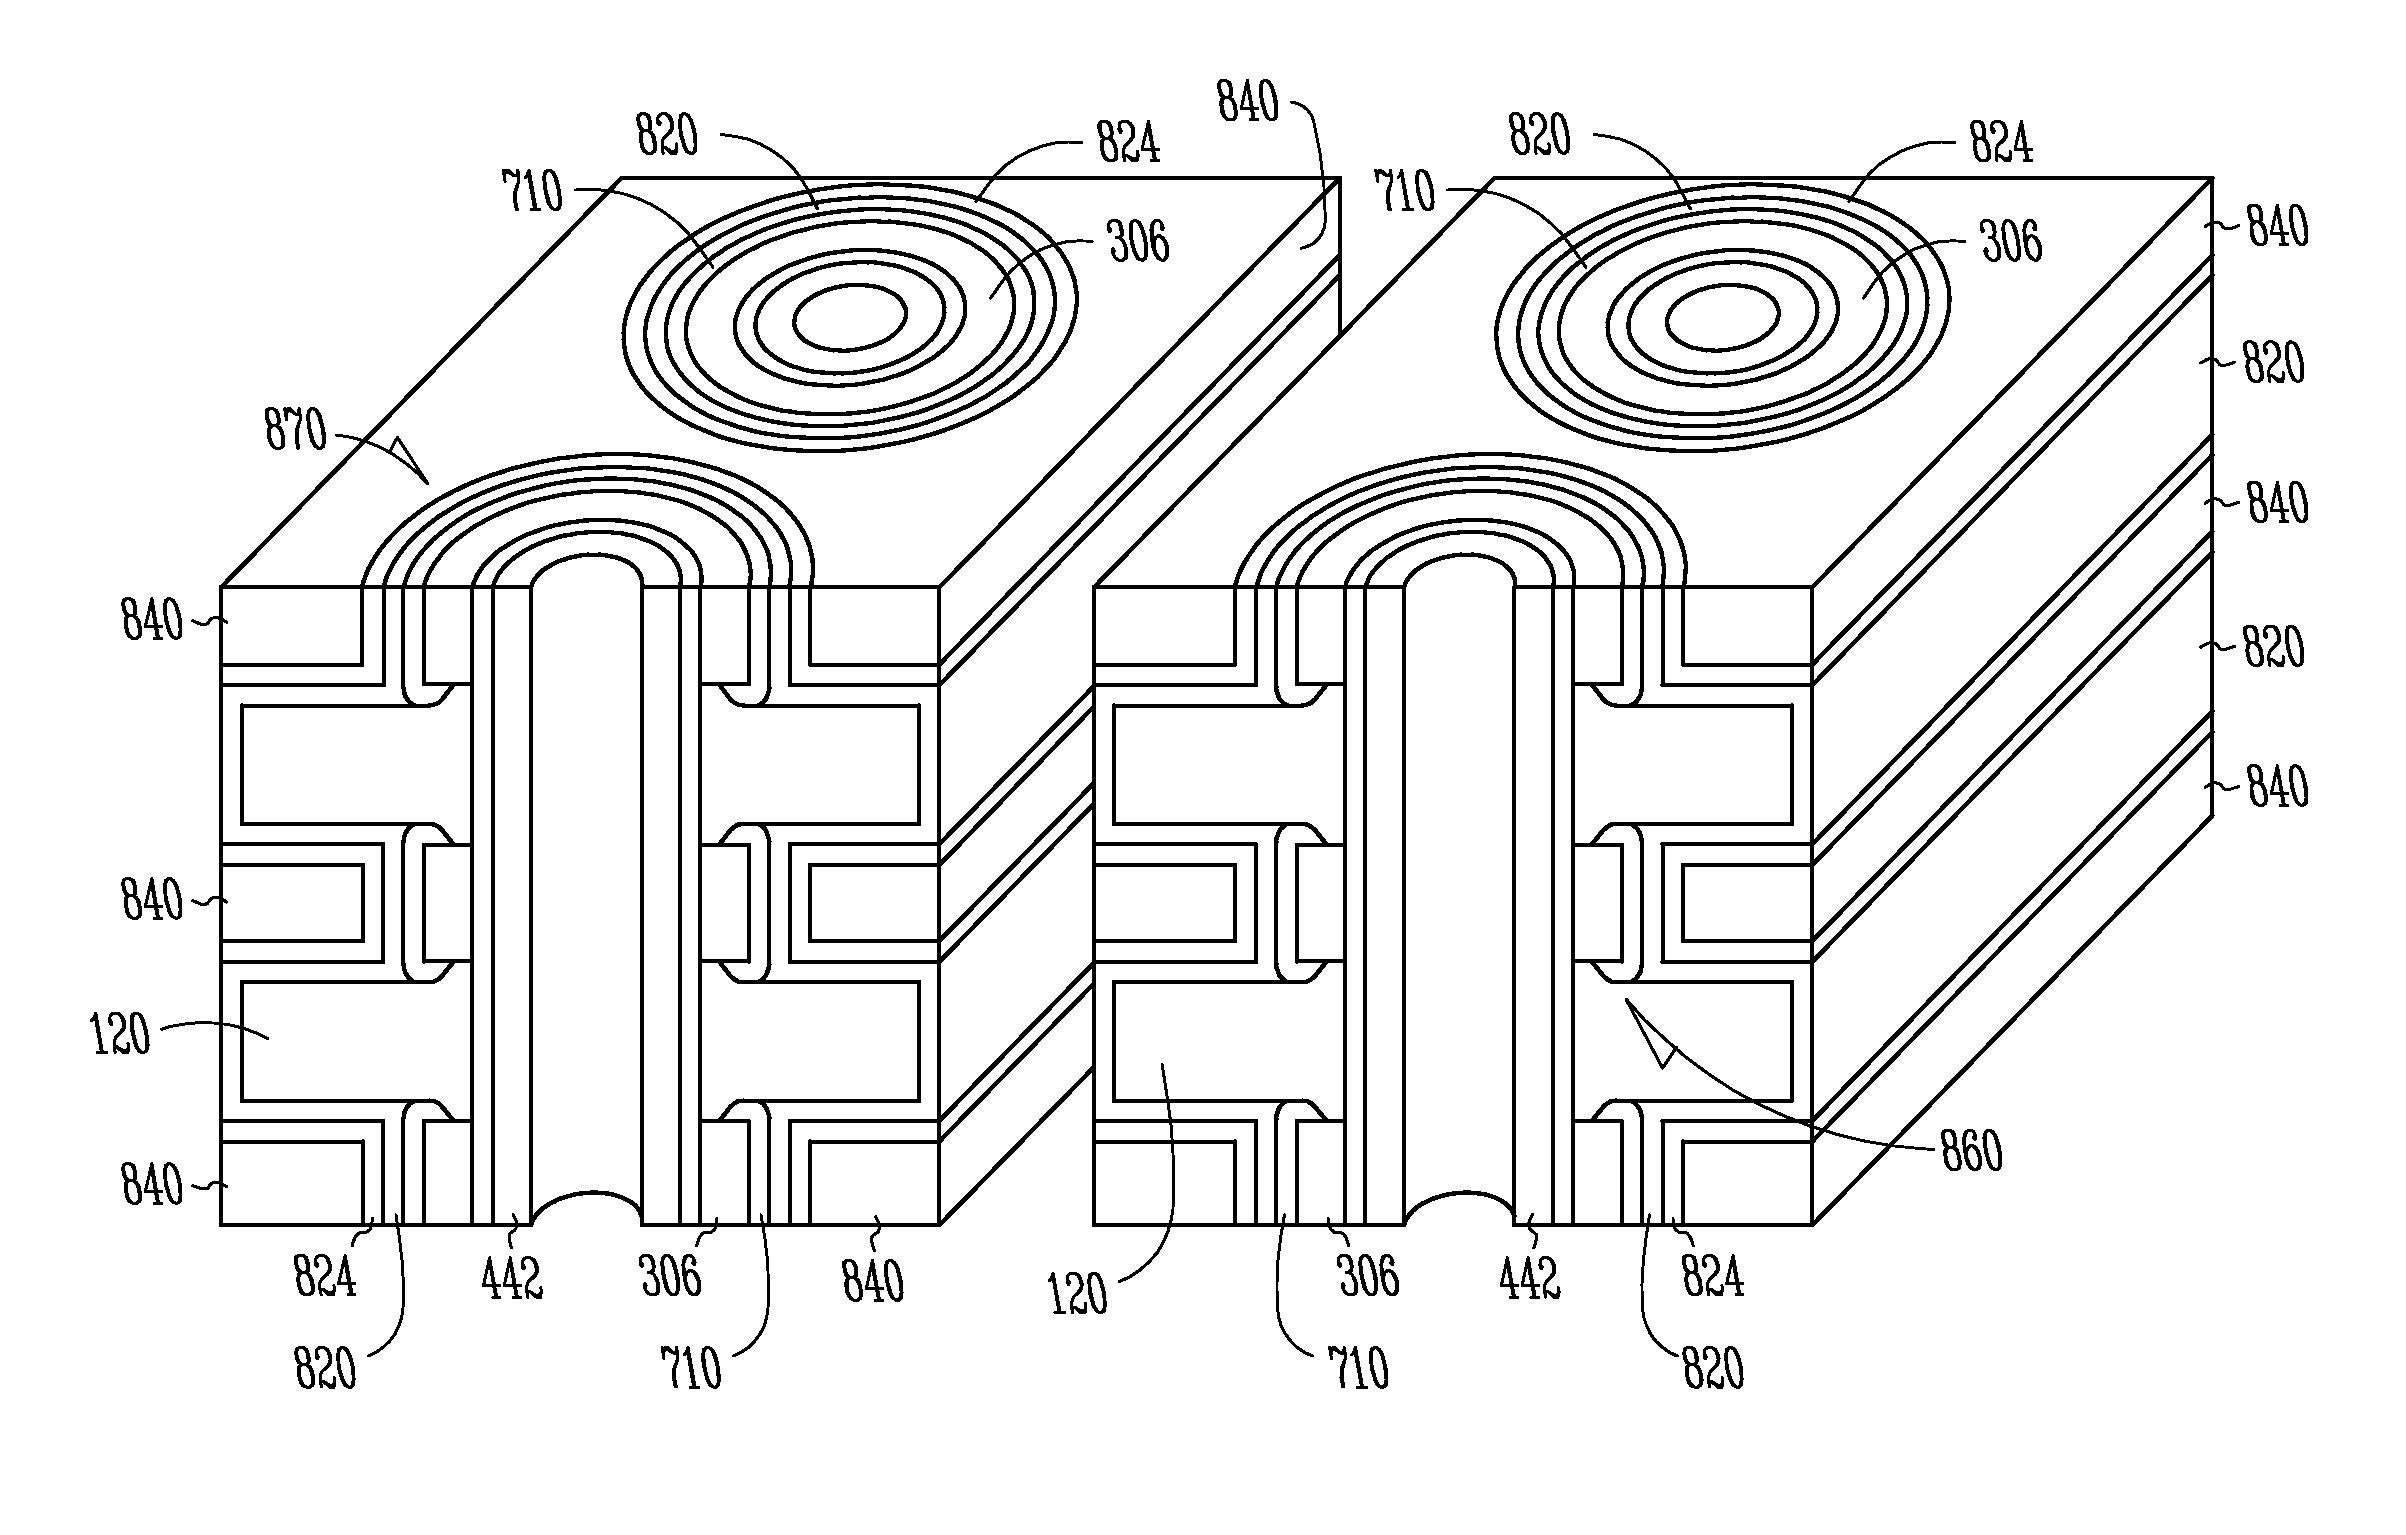 Semiconductor charge storage apparatus and methods